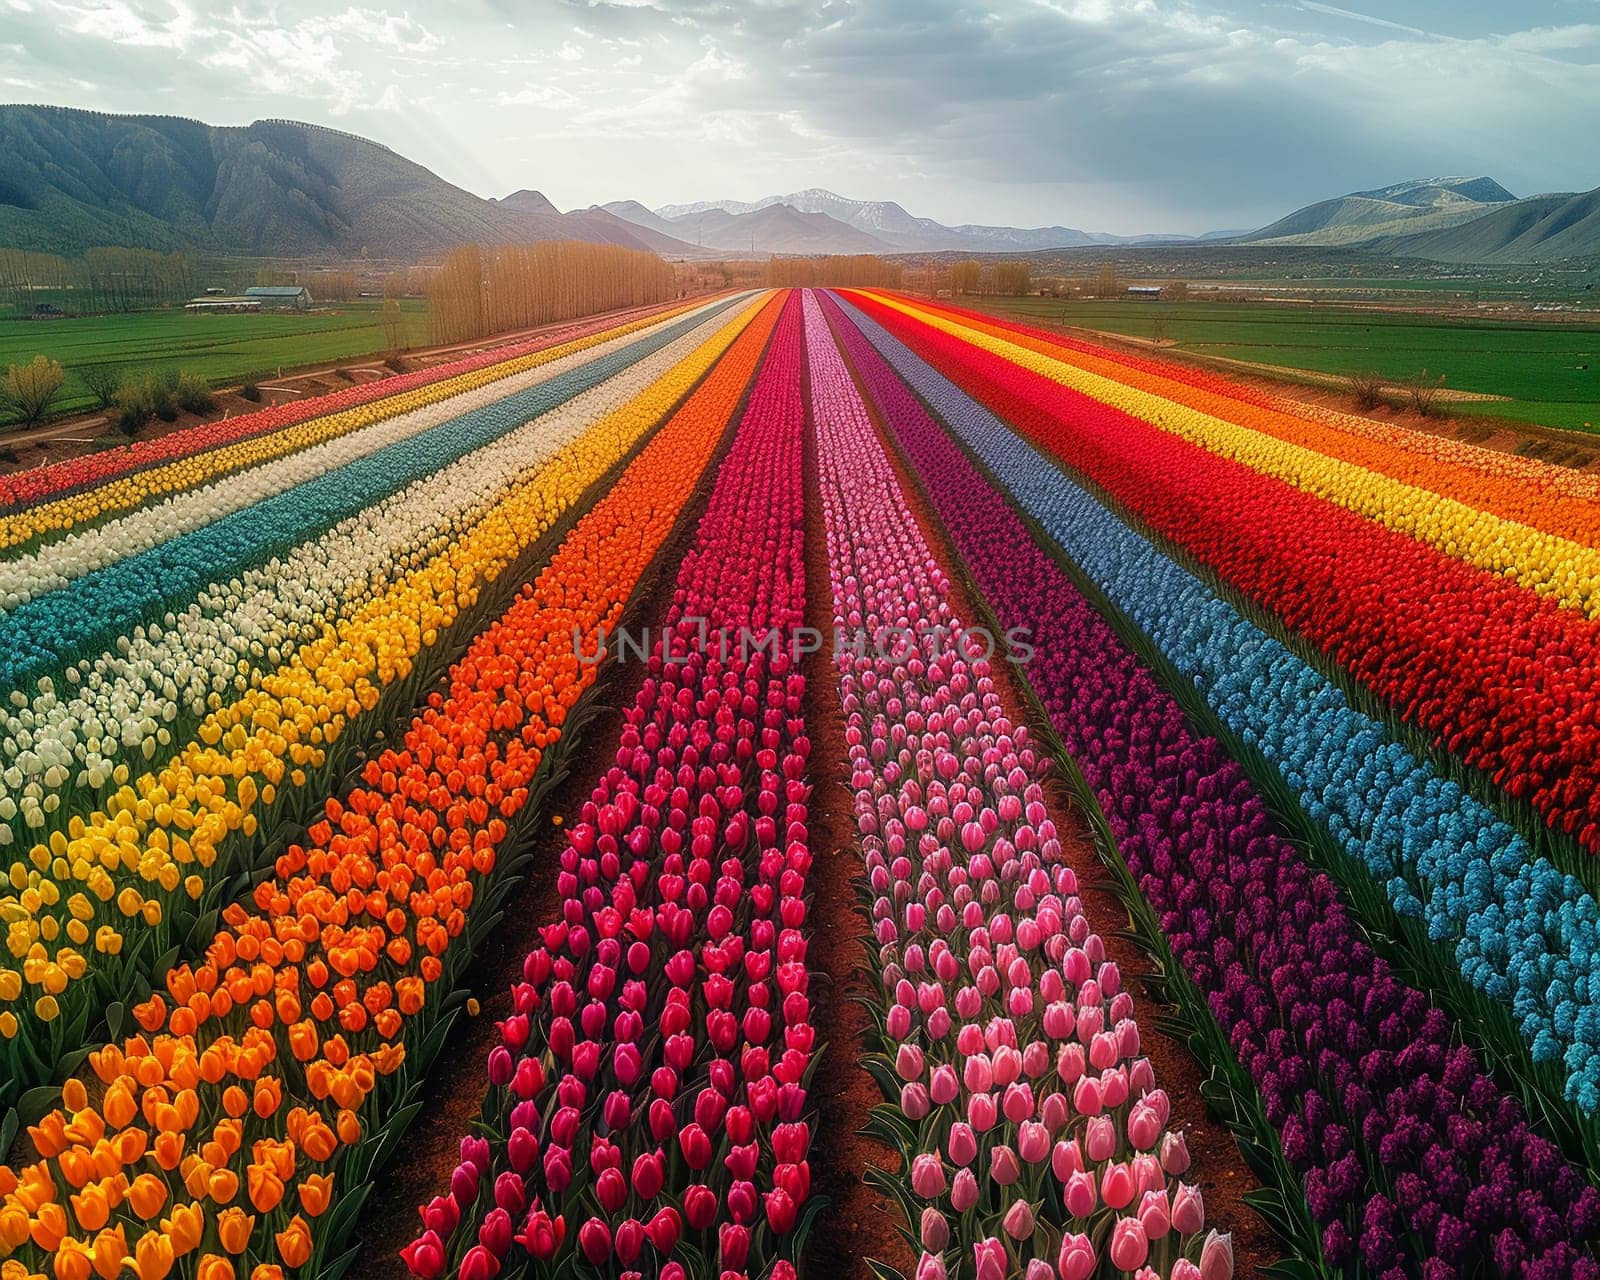 A vibrant tapestry of tulip fields from above, displaying nature's colors in full bloom.